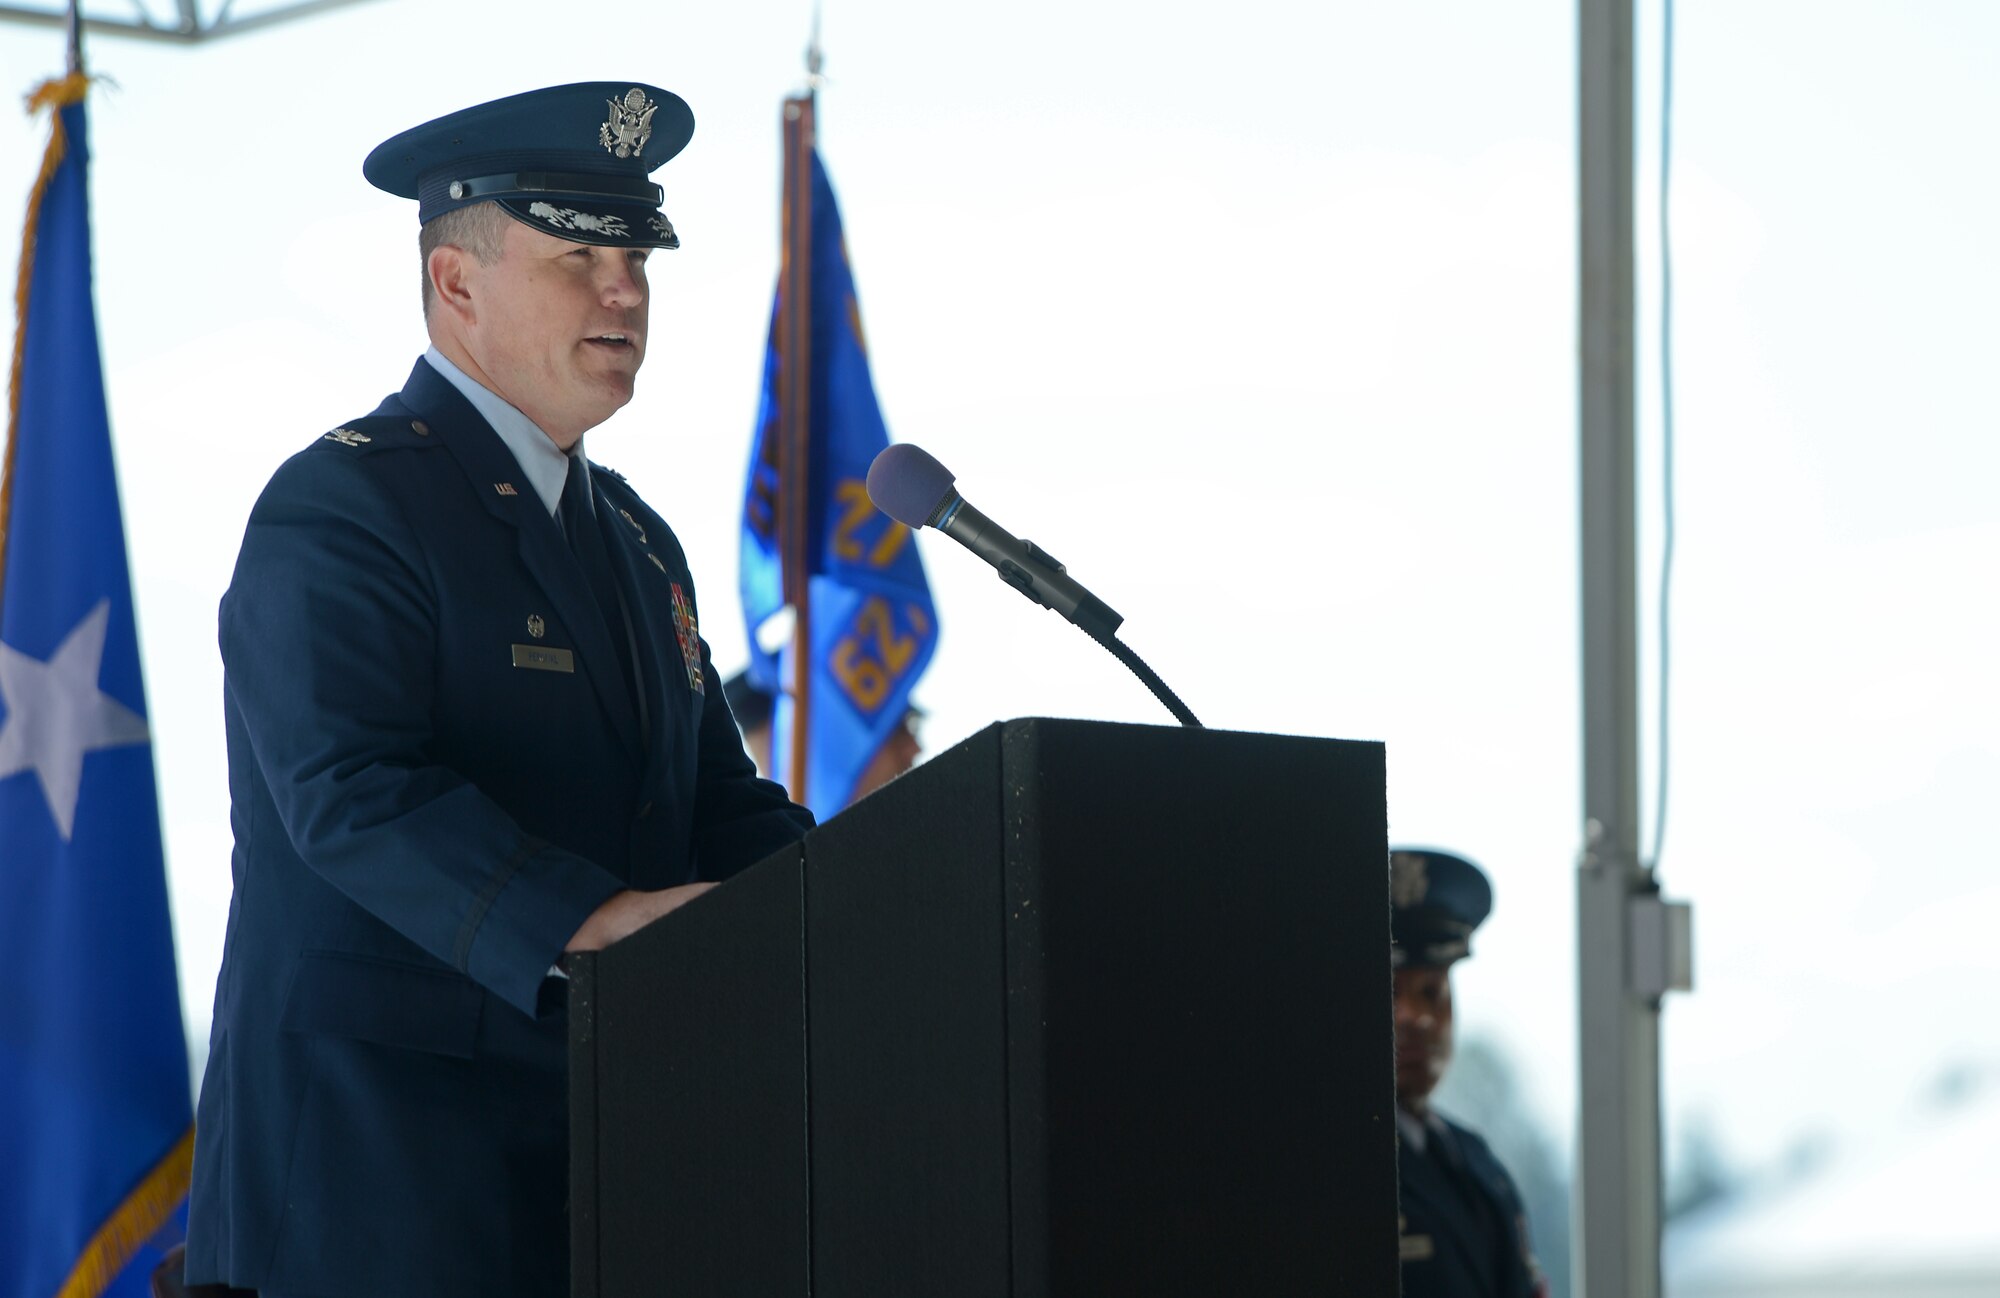 Col. William Percival, 627th Air Base Group commander, thanks attendees at the 627th ABG change of command ceremony after taking command May 24, 2017, at Joint Base Lewis-McChord, Wash. Percival comes to the Pacific Northwest from the 612th Combined Air and Space Operations Center, Davis-Monthan Air Force Base, Ariz., where he served as the chief of Air Mobility Division overseeing a 24-member division where he directed U.S. Southern Command’s intra-theater airlift and air refueling operations in Central America, South America, and the Caribbean. (U.S. Air Force photo/Senior Airman Divine Cox)